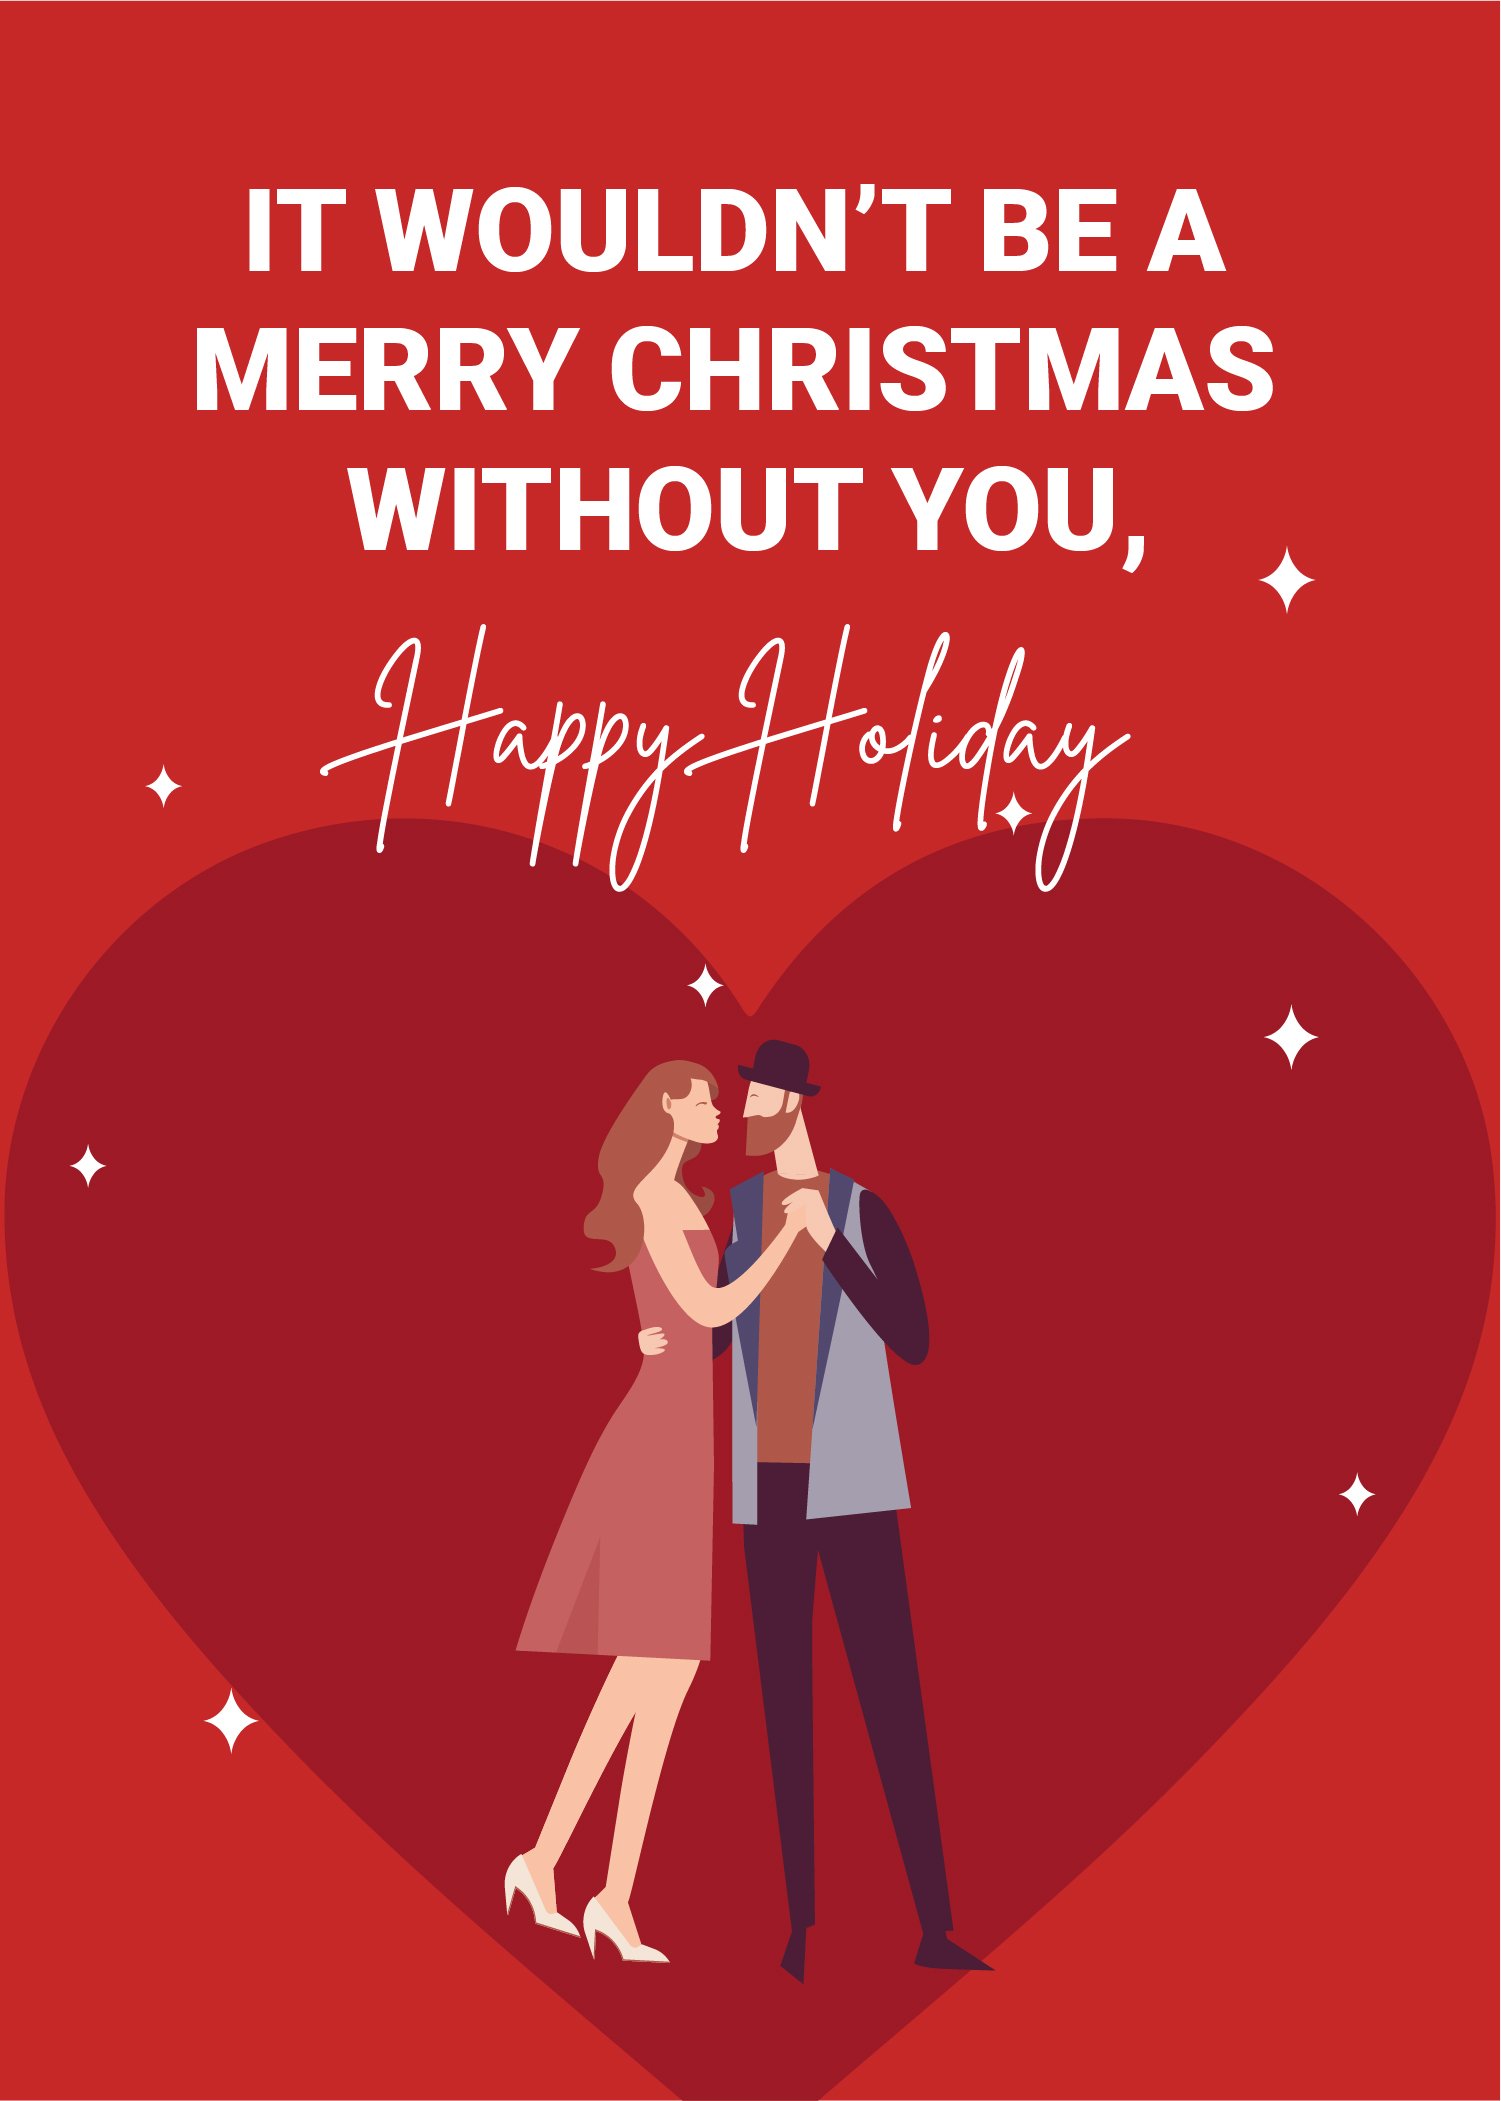 Free Christmas Wishes For Friend in Word, Google Docs, Illustrator, PSD, Apple Pages, Publisher, EPS, SVG, JPG, PNG